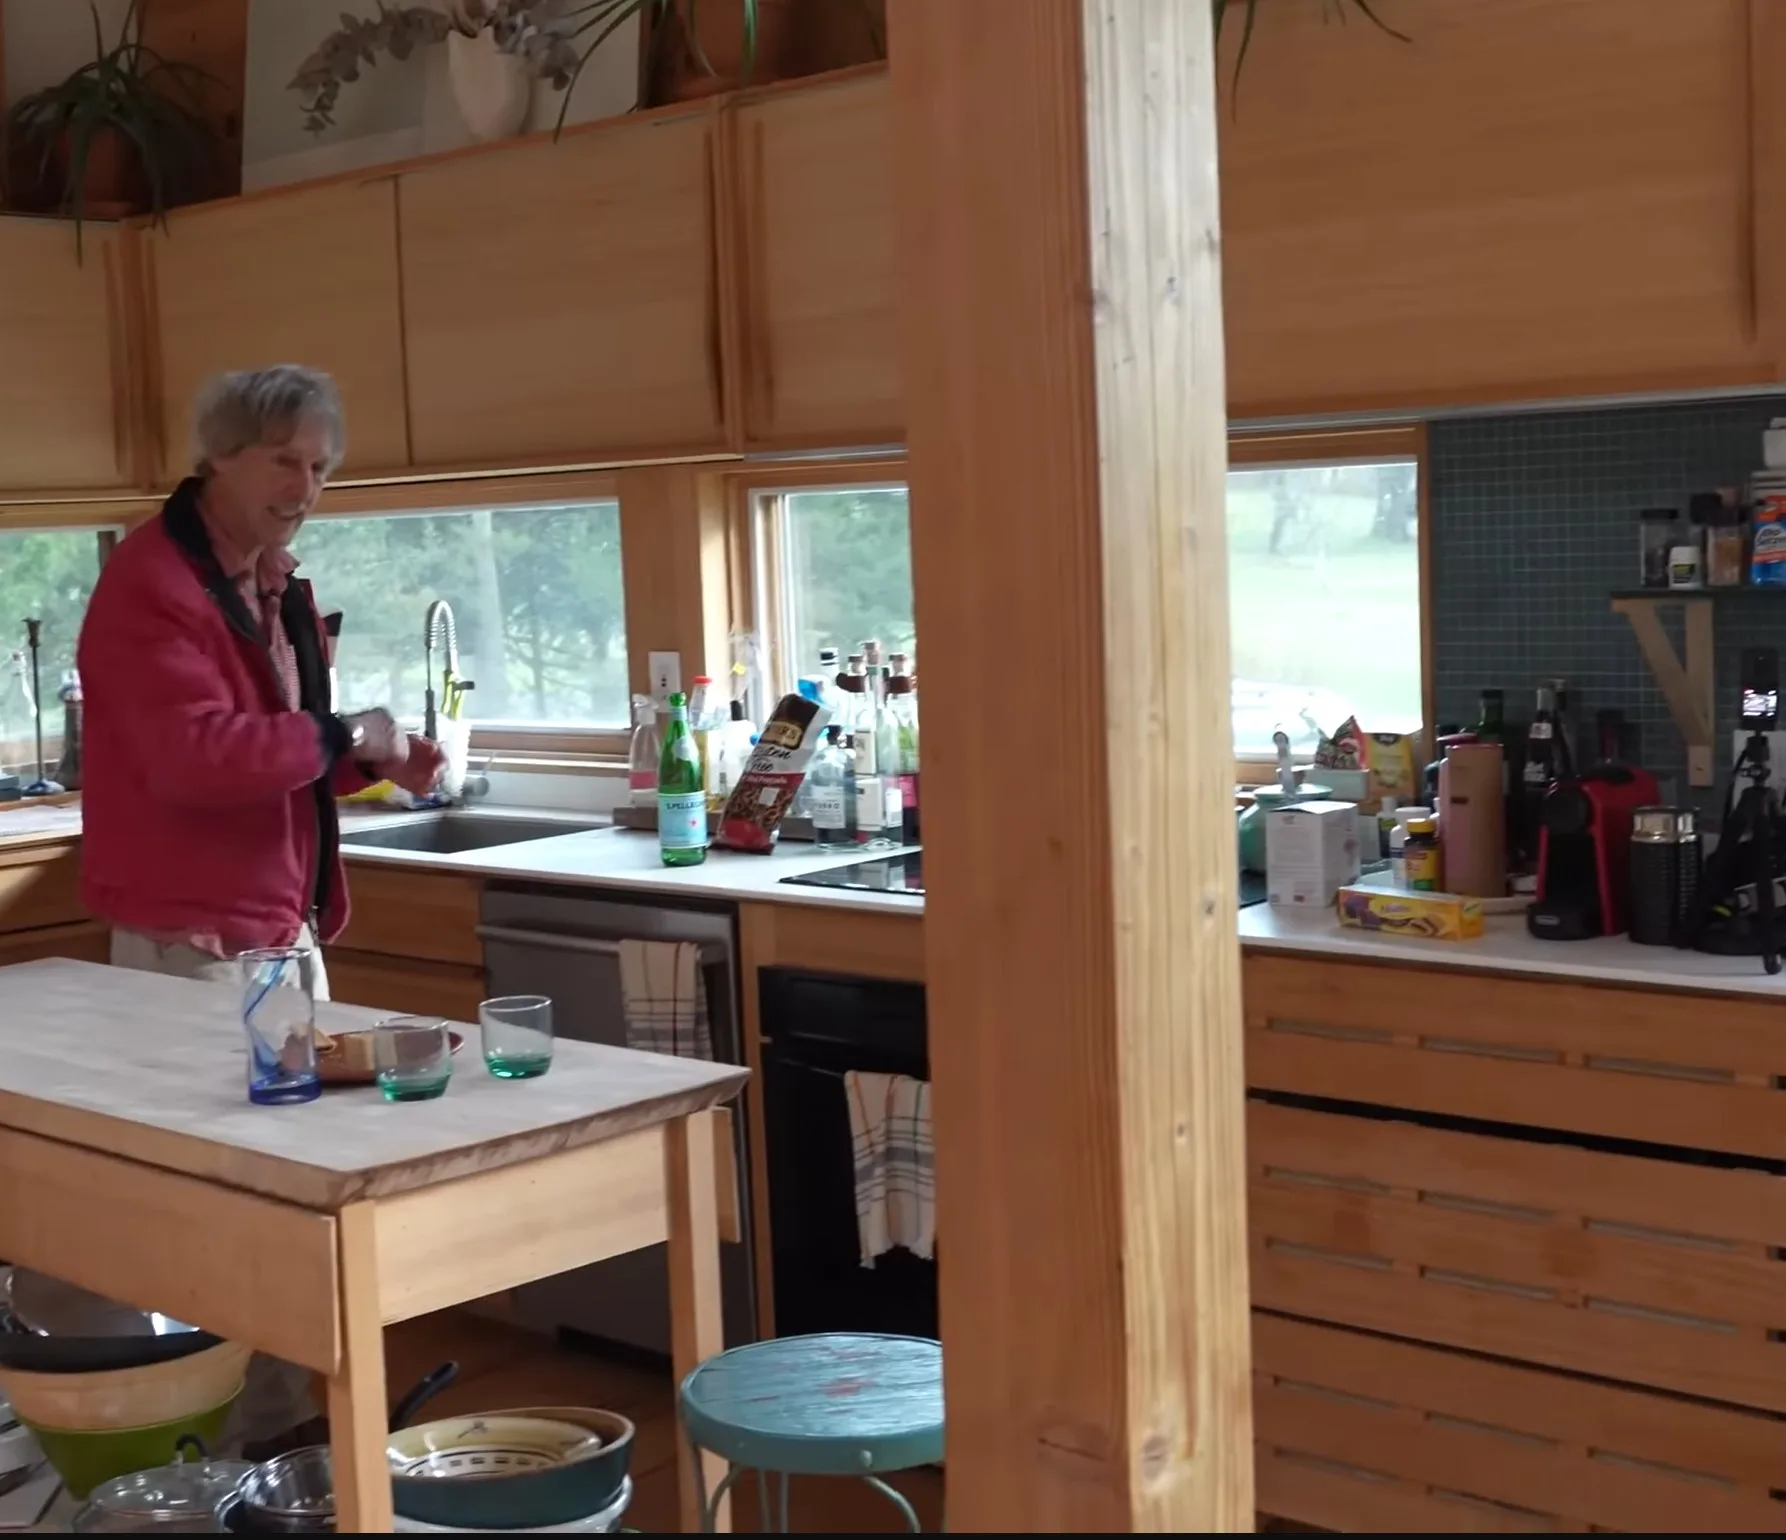 Cabin's kitchen with built-in cabinetries made of cypress and bamboo.